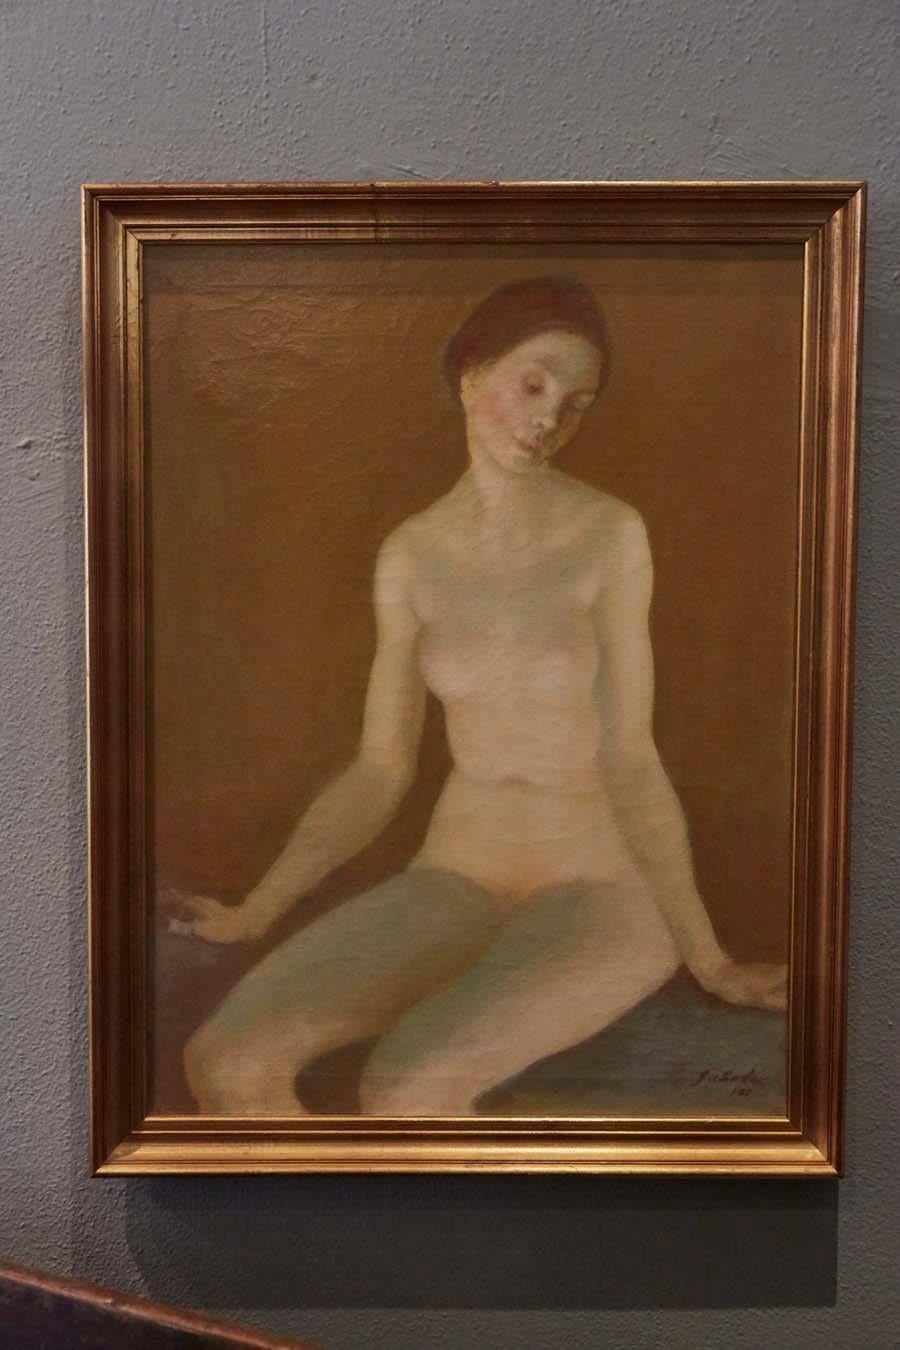 Finnish 'Nude Study' by G. Von Swetlik, Signed and Dated 1977 For Sale